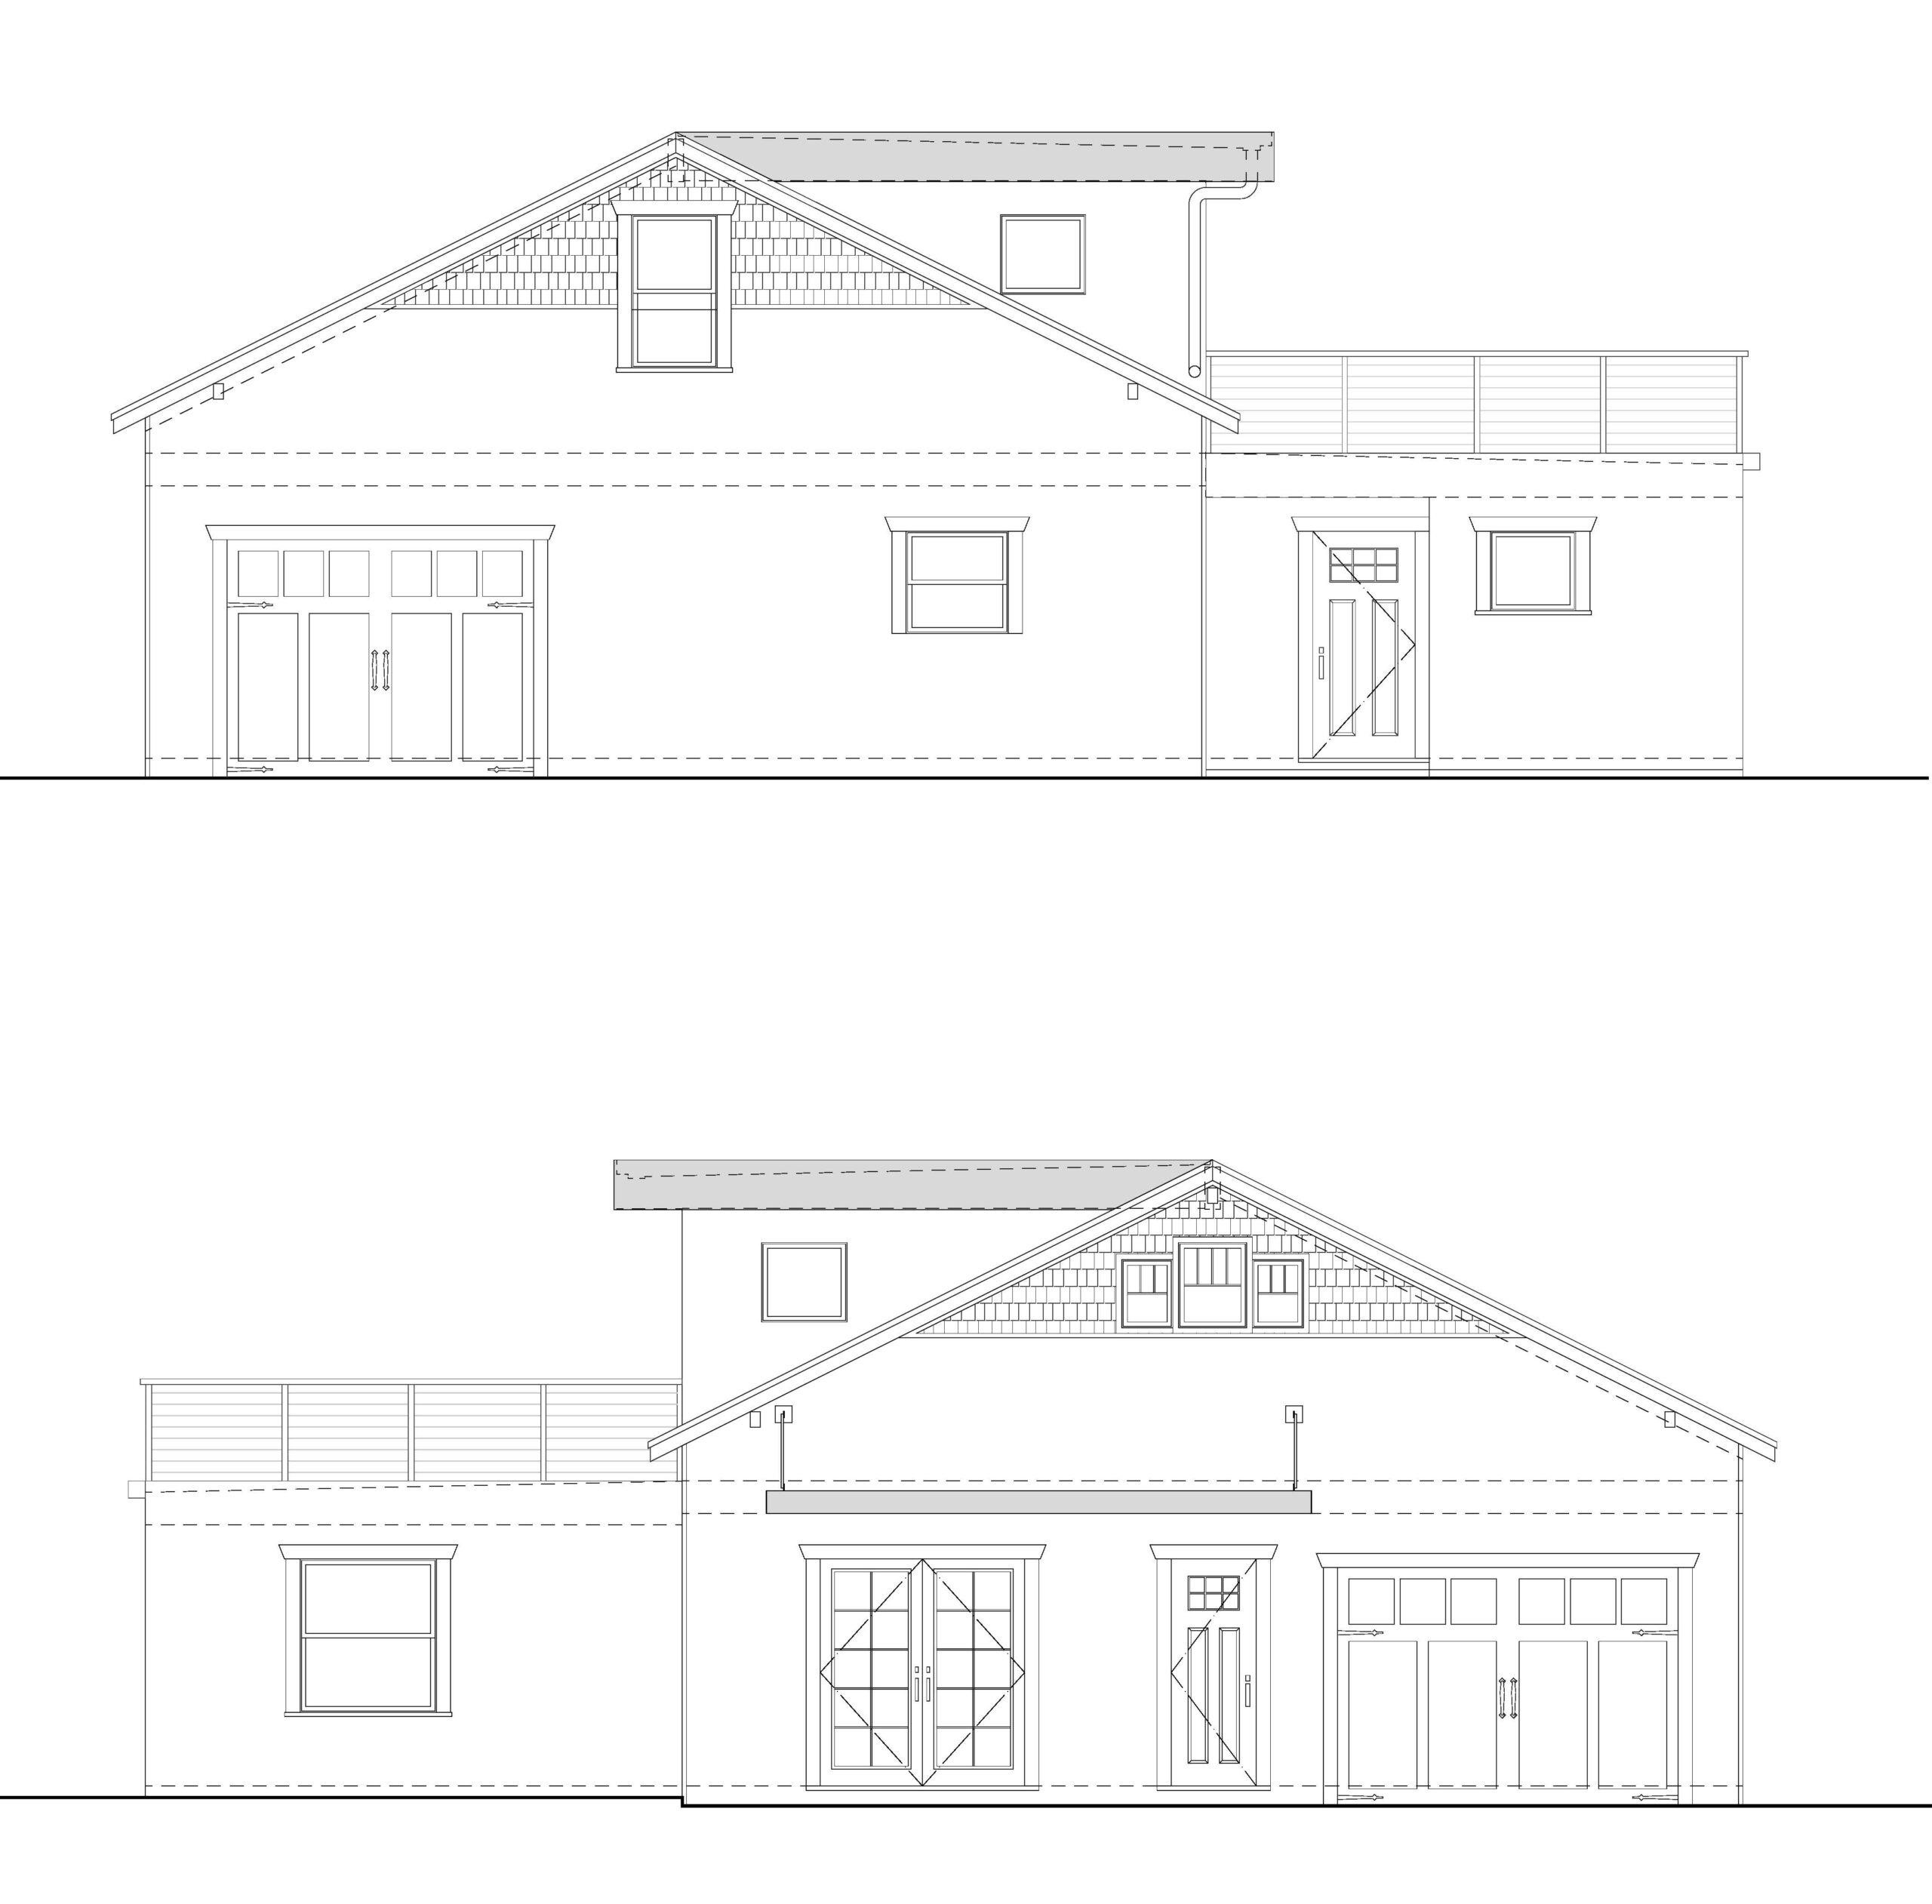 North & South Elevations